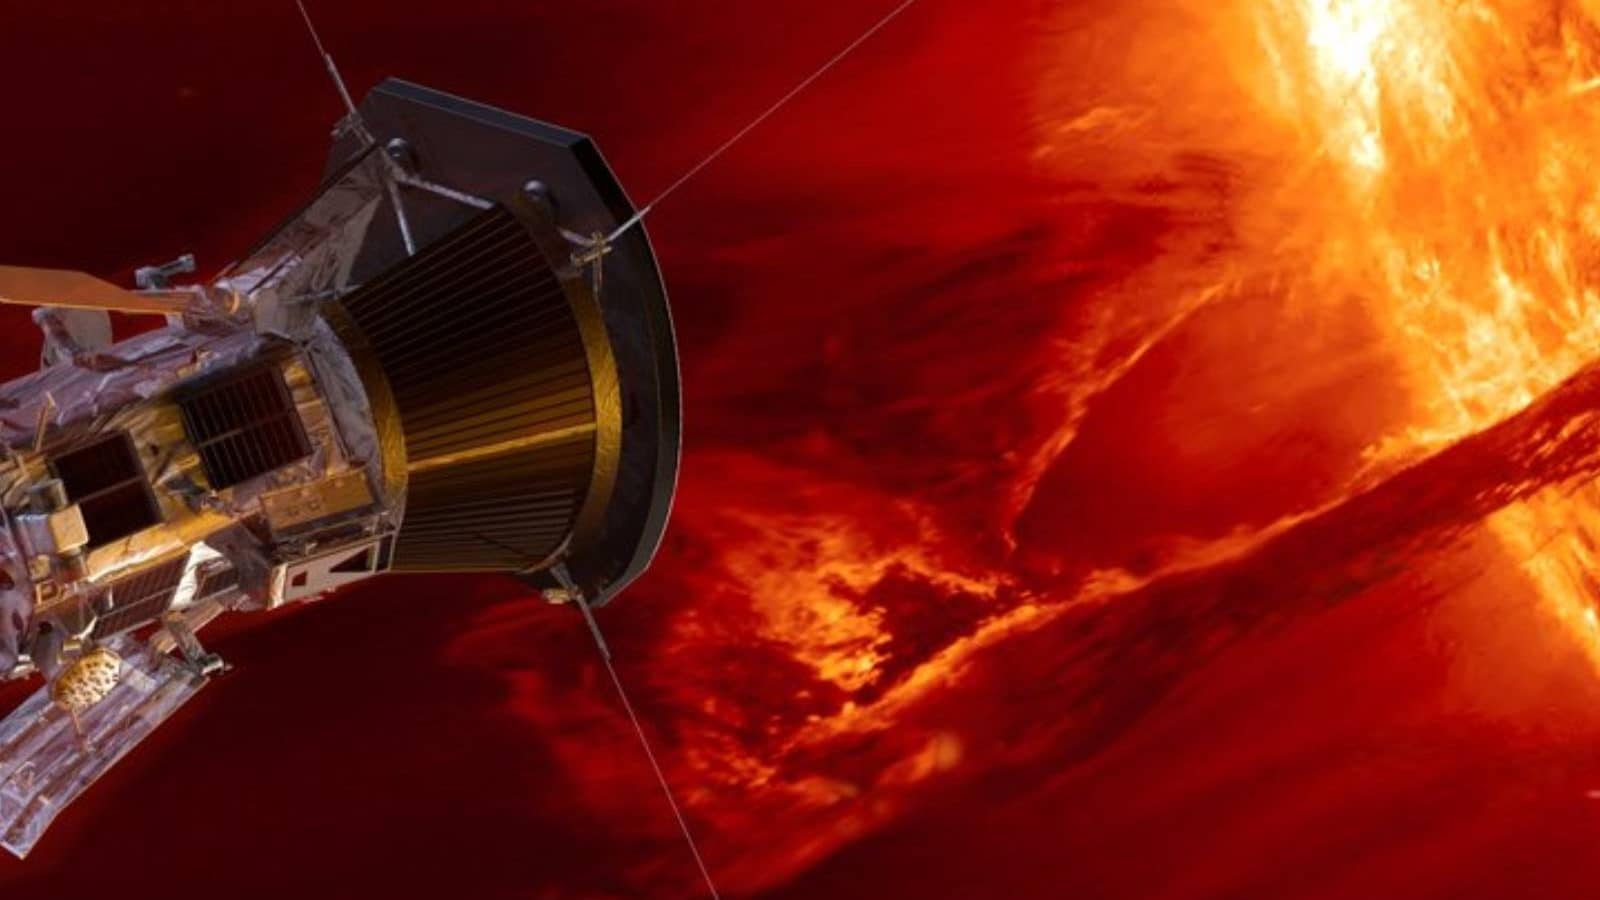 Parker Solar Probe | NASA touches the sun; Parker Solar Probe is the first man-made spacecraft to touch the sun - Newsdir3